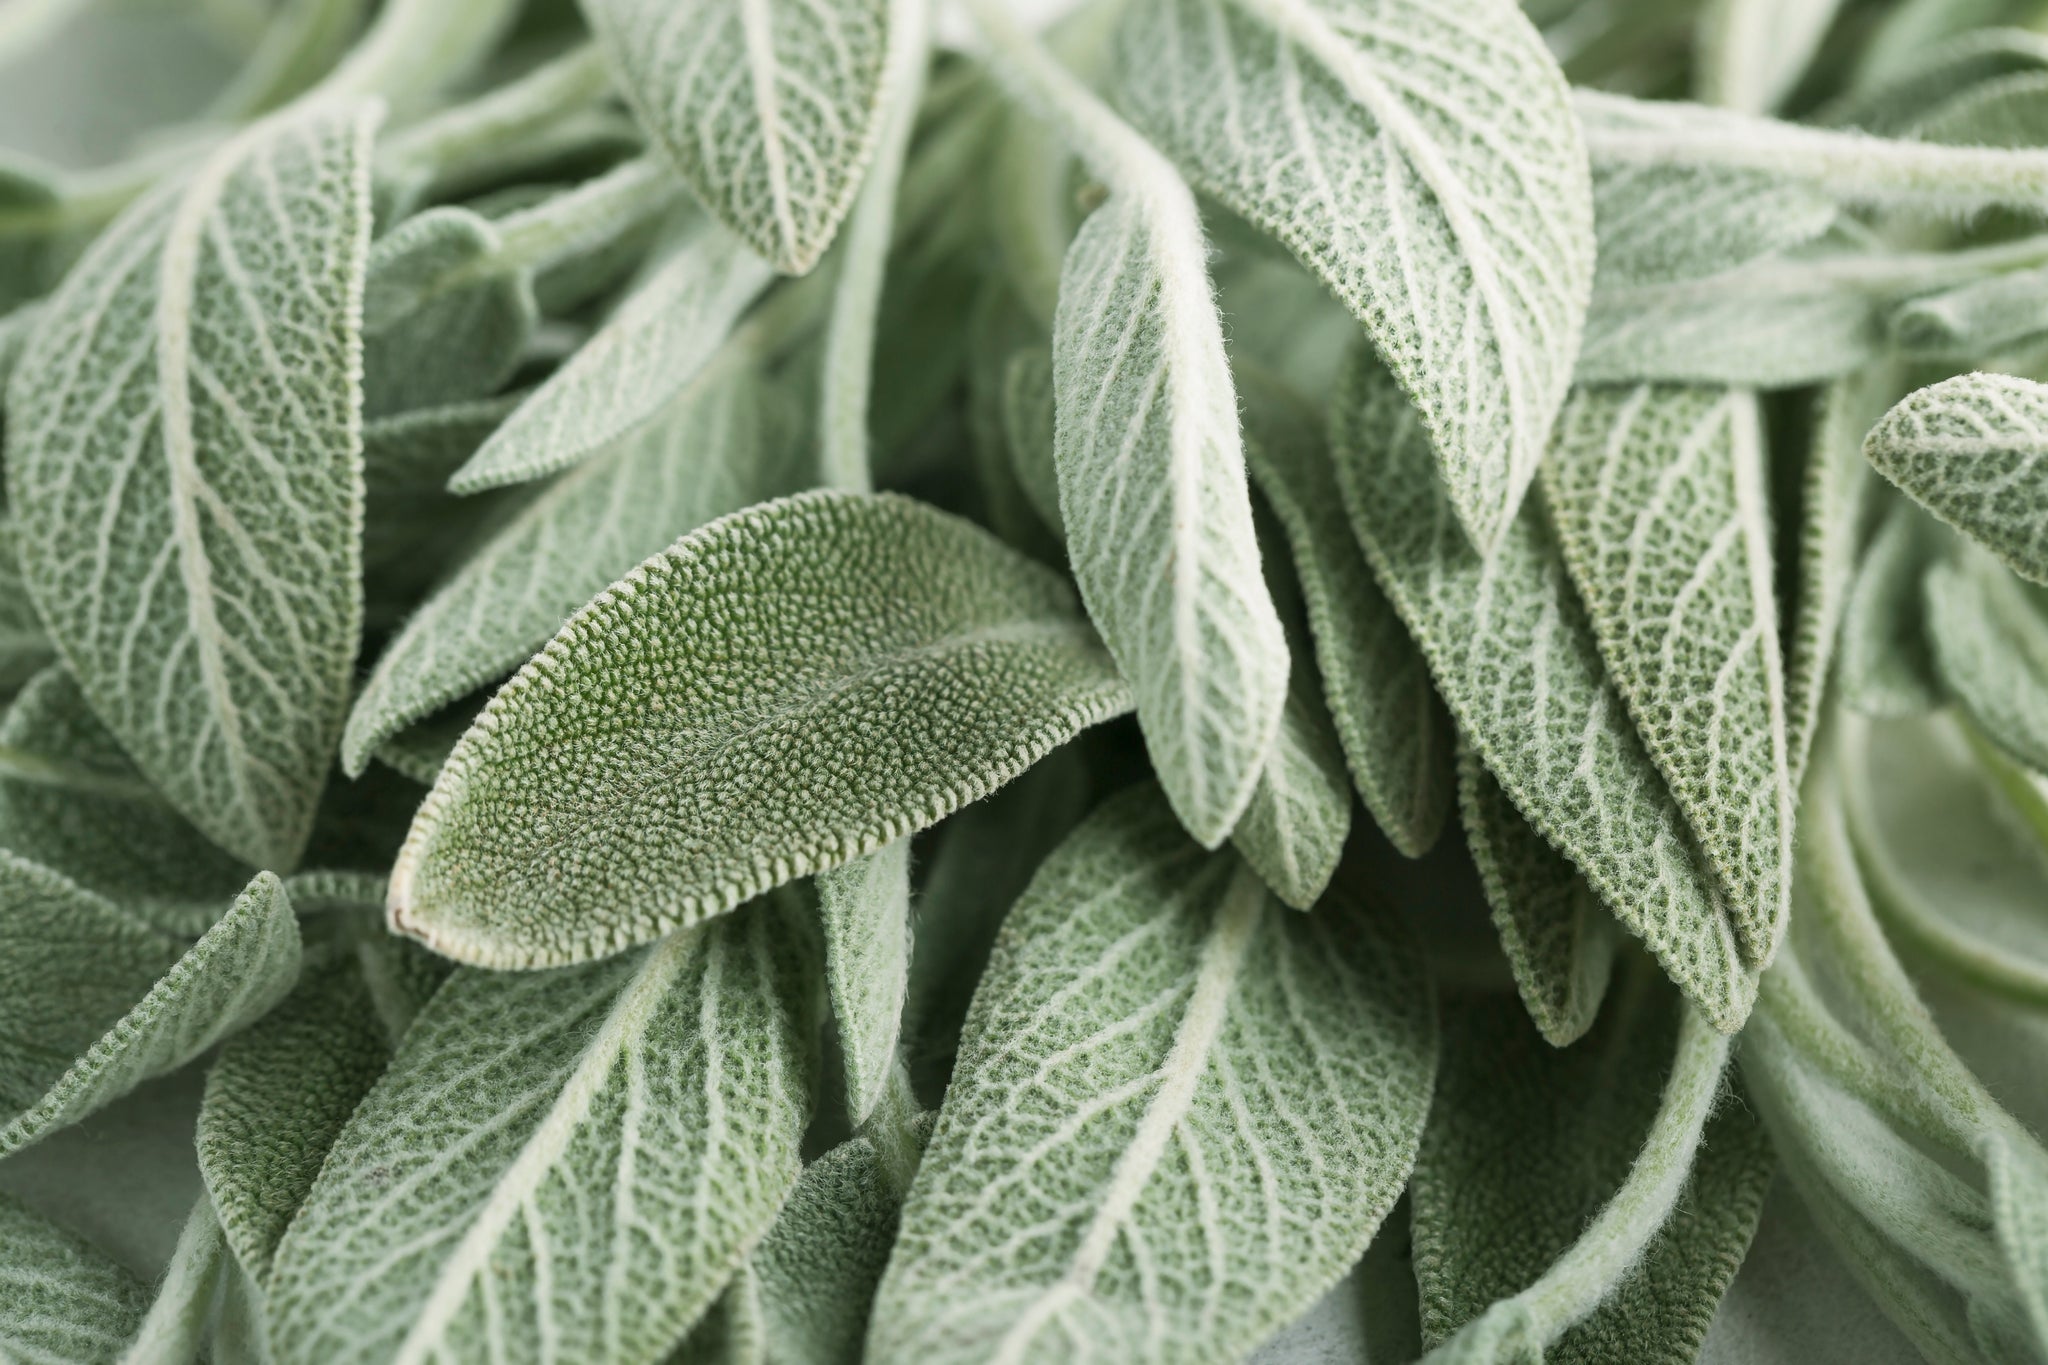 Sage’s beneficial effects are mainly related to the fact that it acts as a tonic that strengthens the nervous system. 